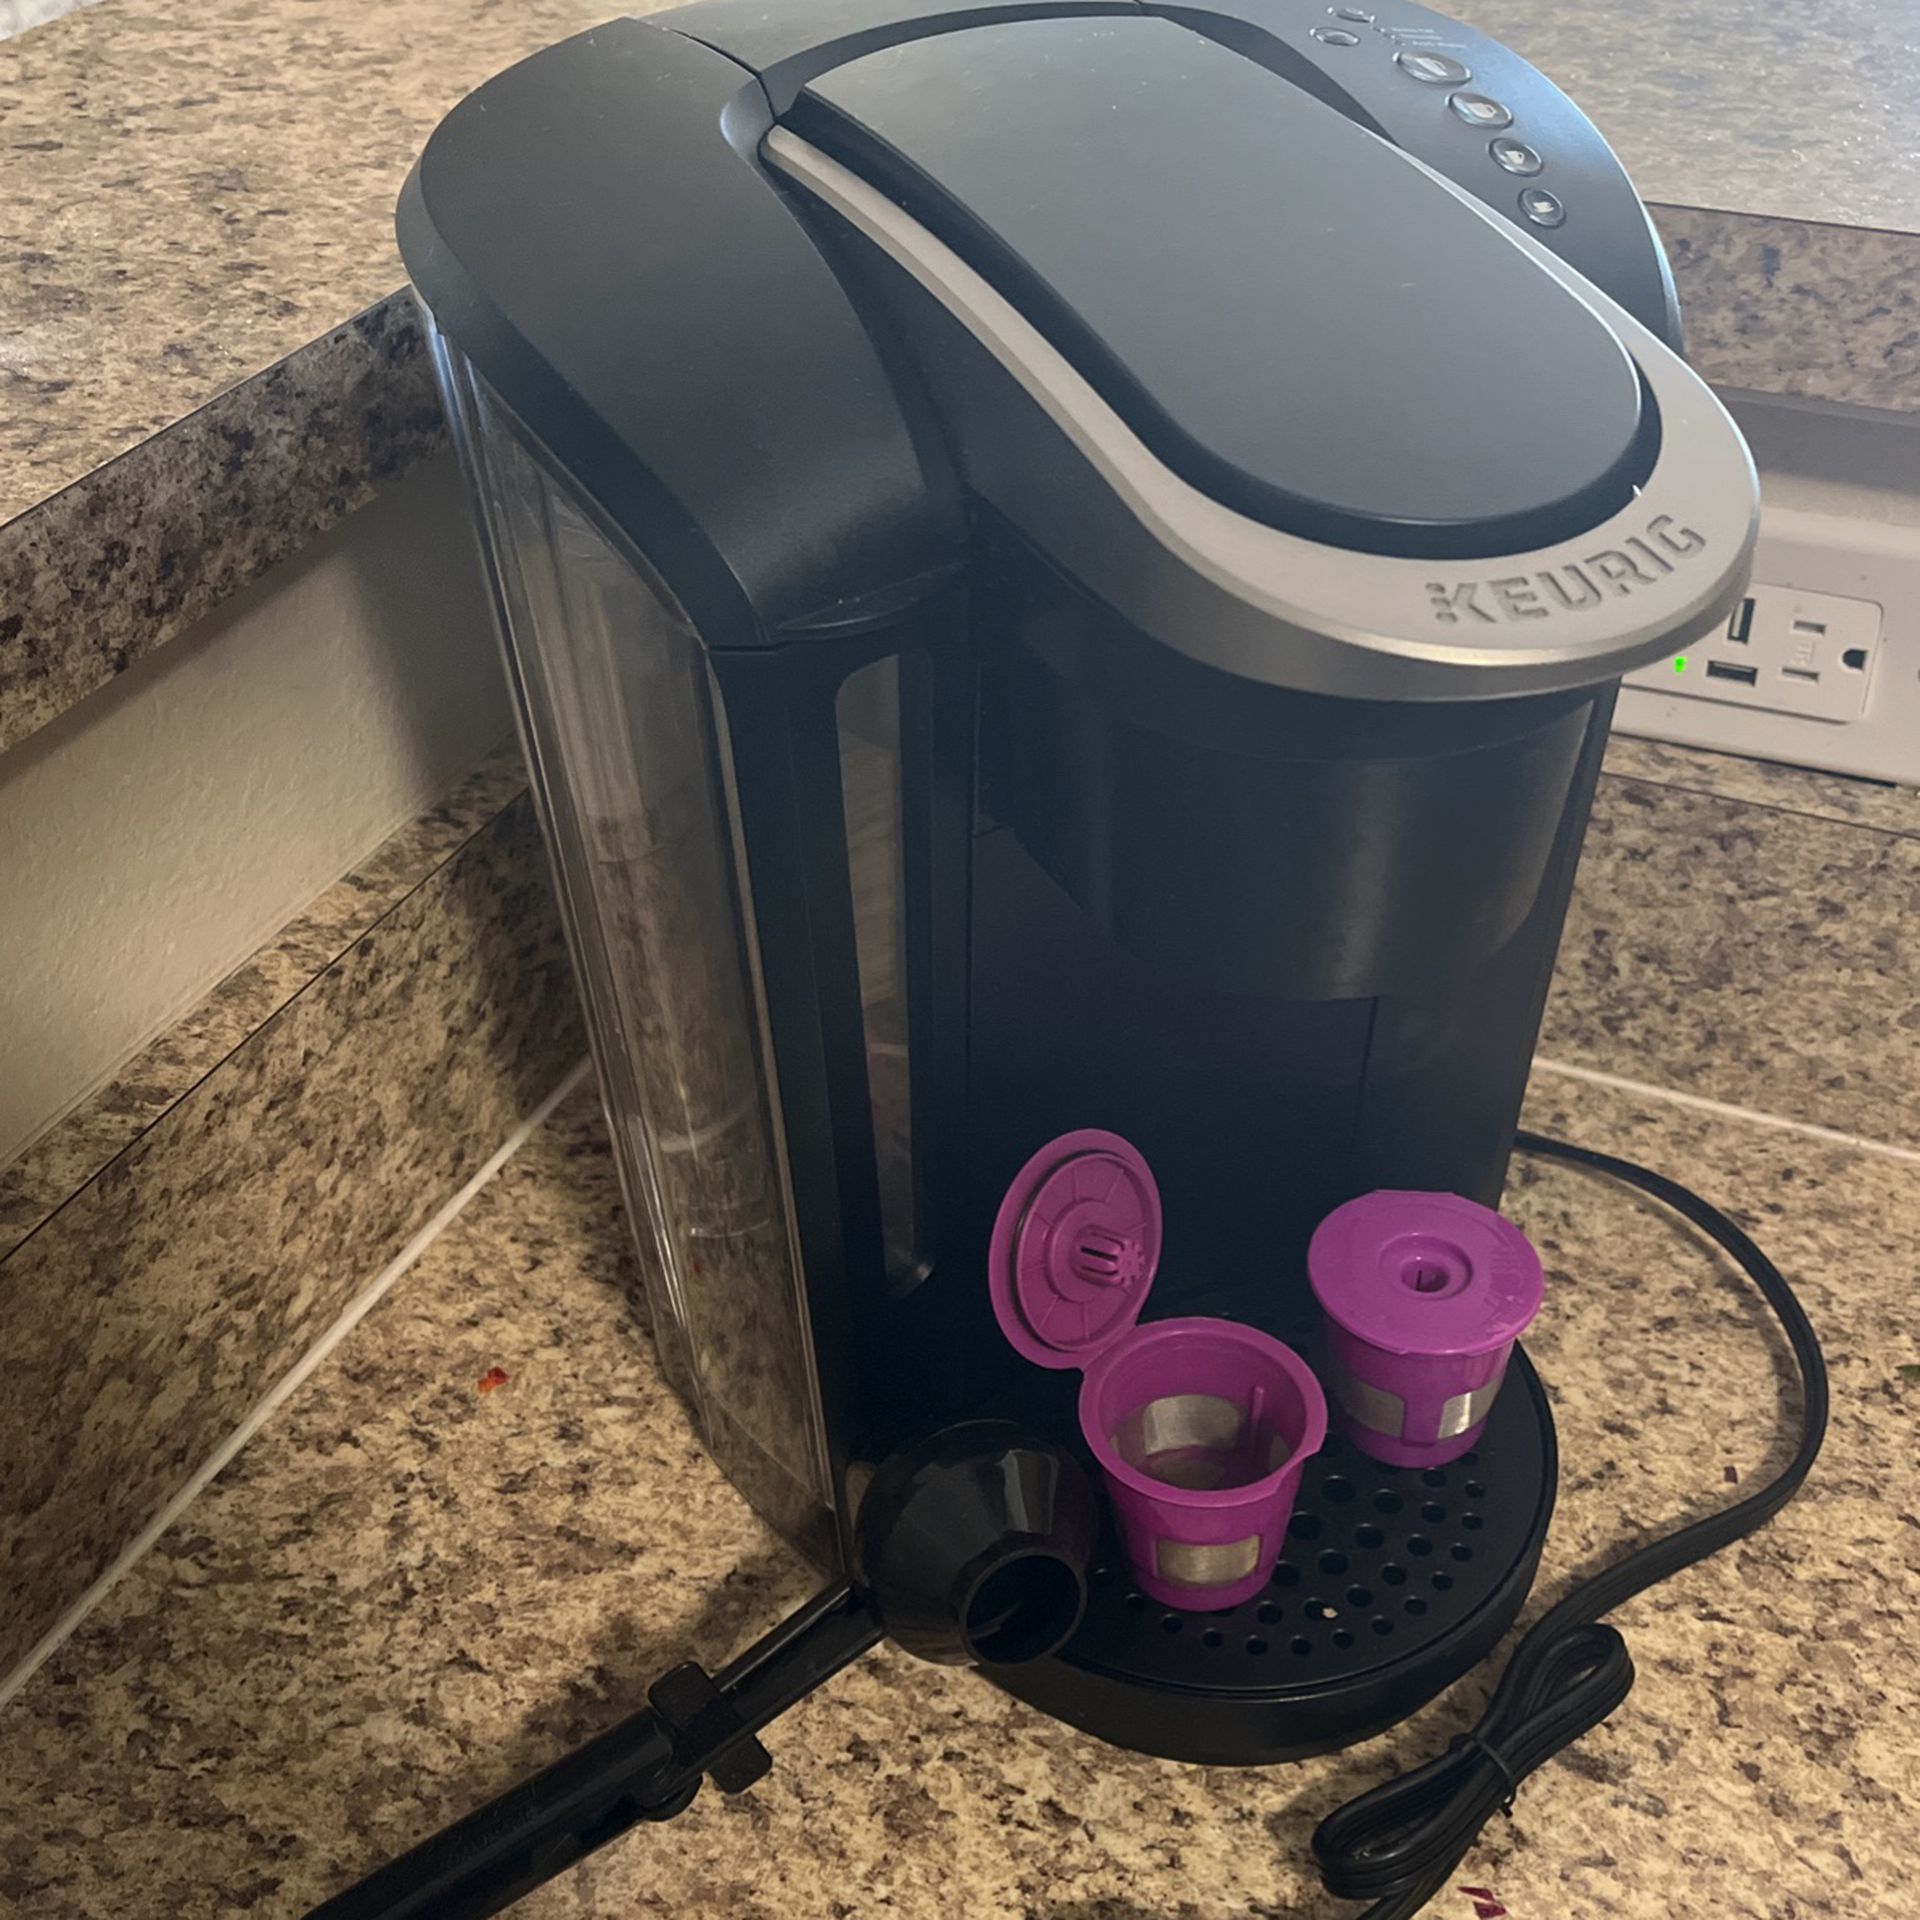 Keurig With Reusable Pod Containers